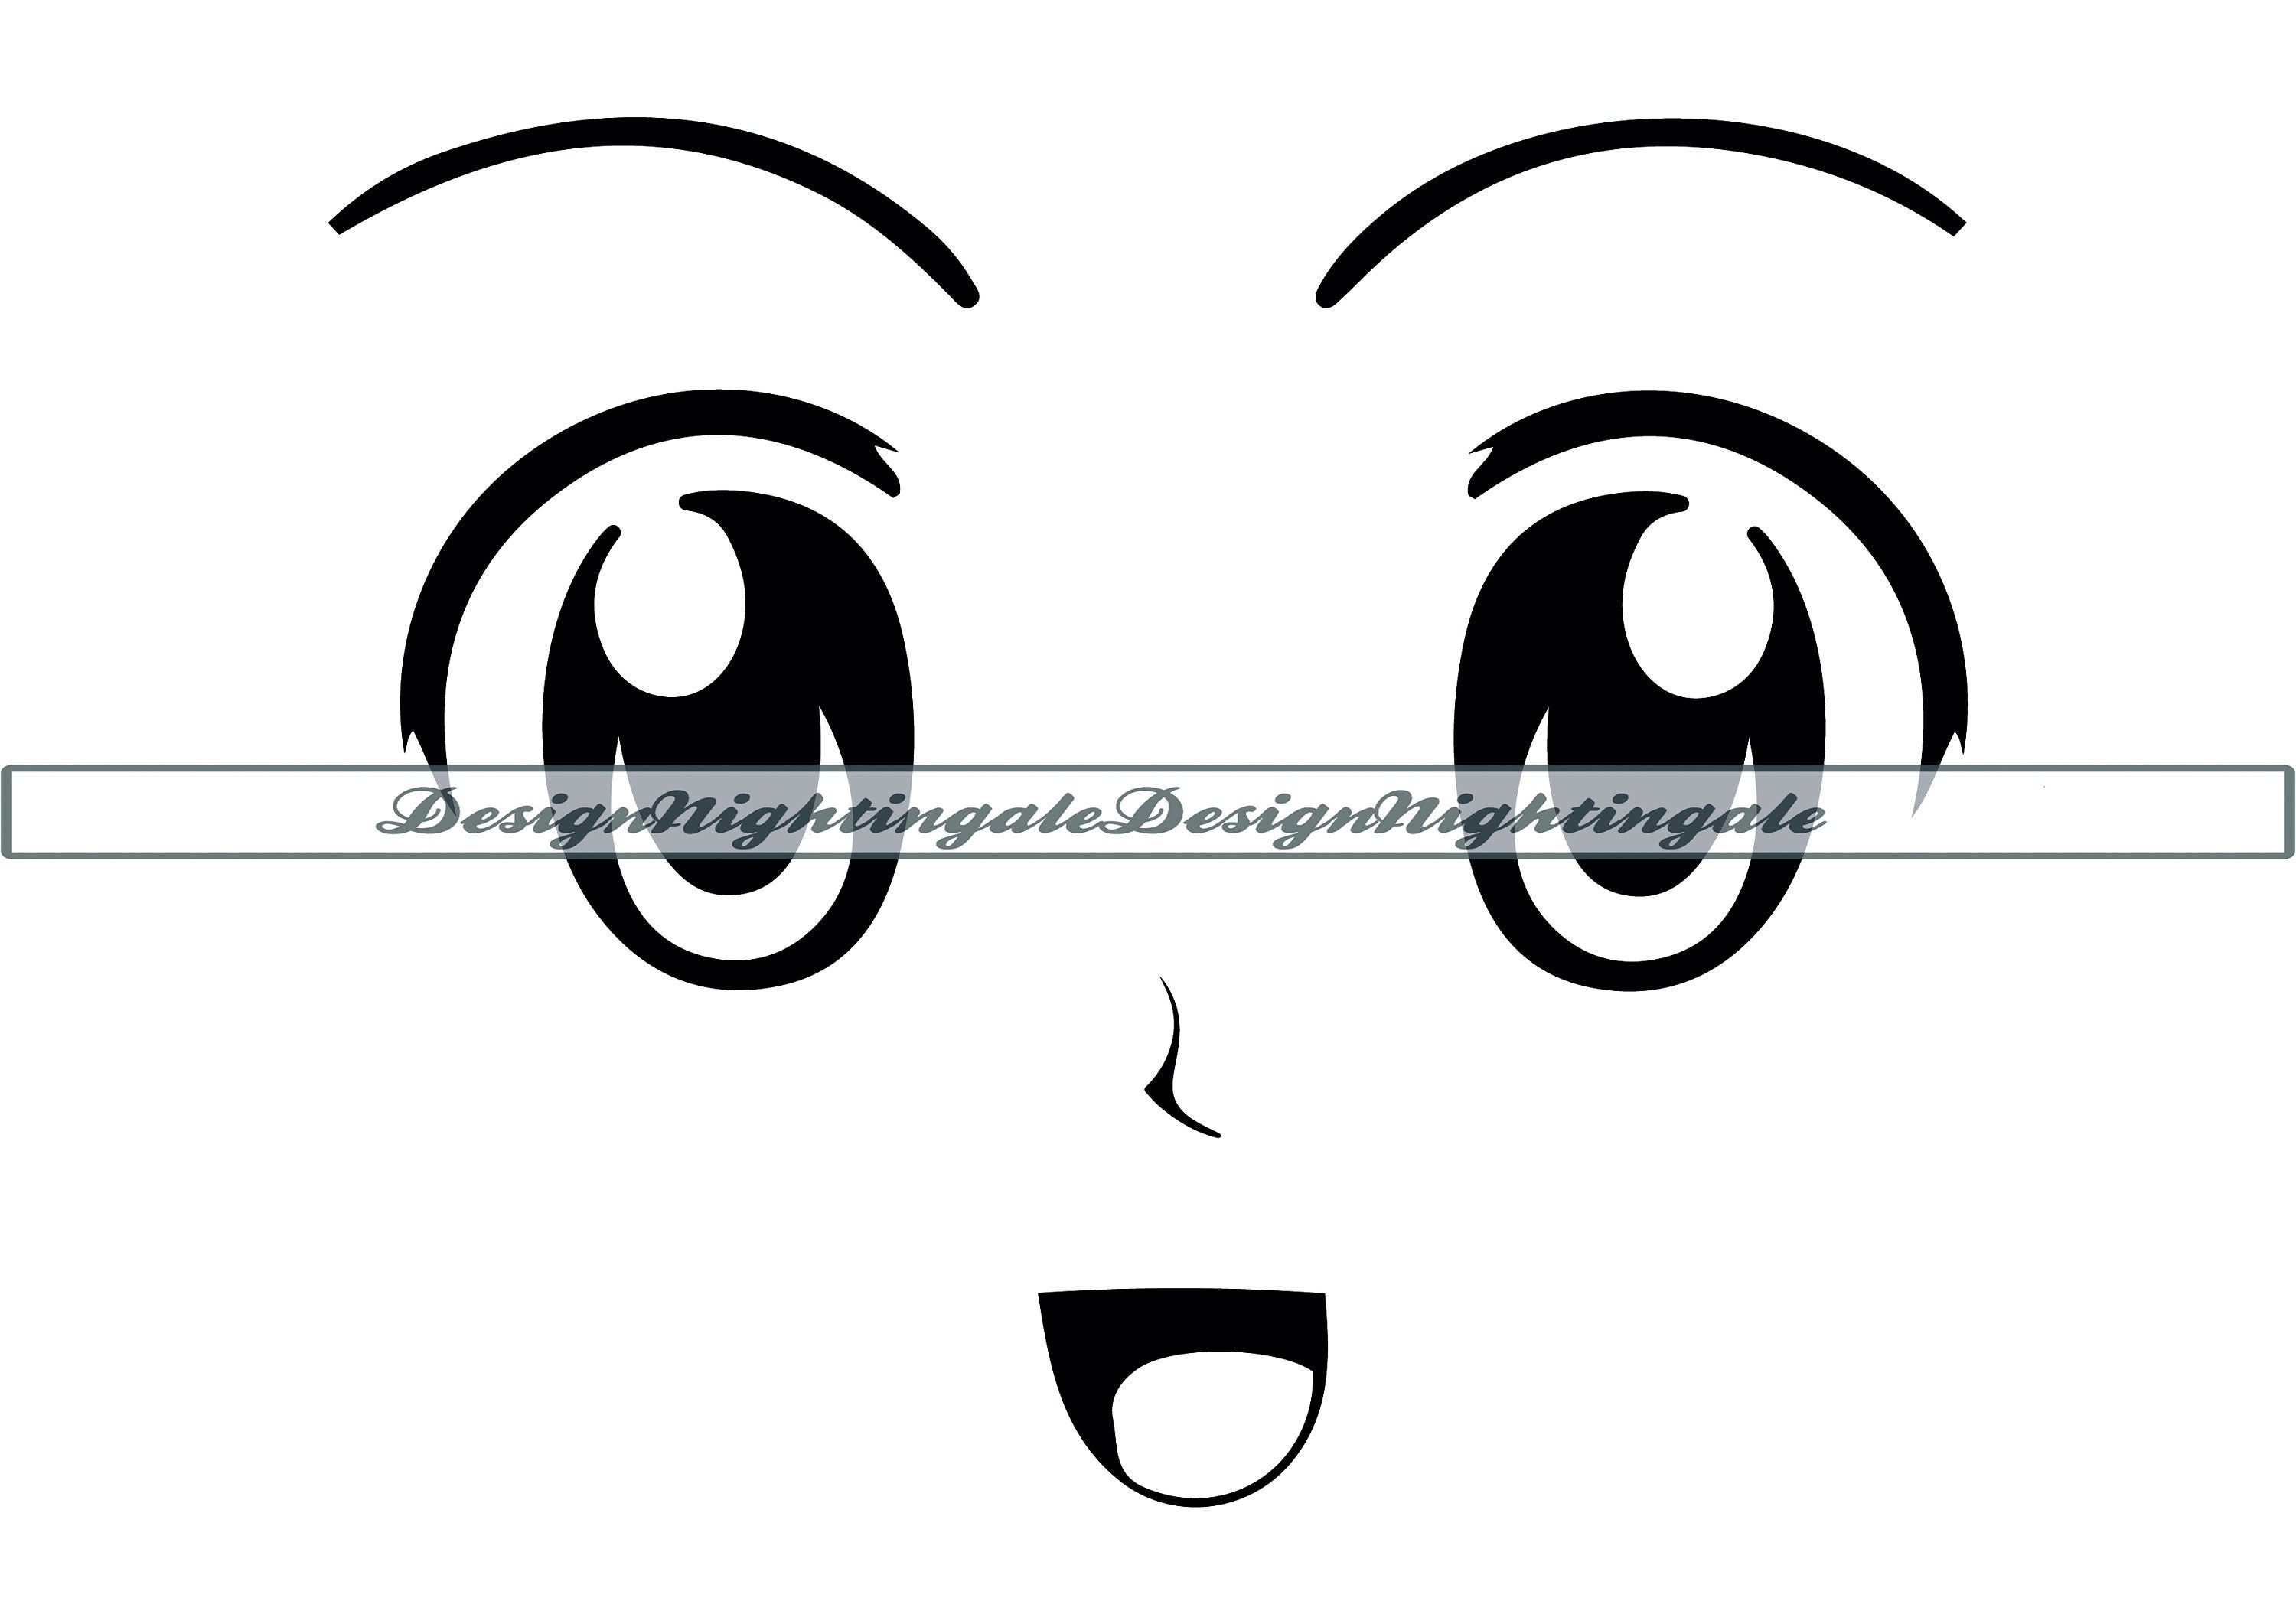 Tired Red Anime Eyes PNG & SVG Design For T-Shirts